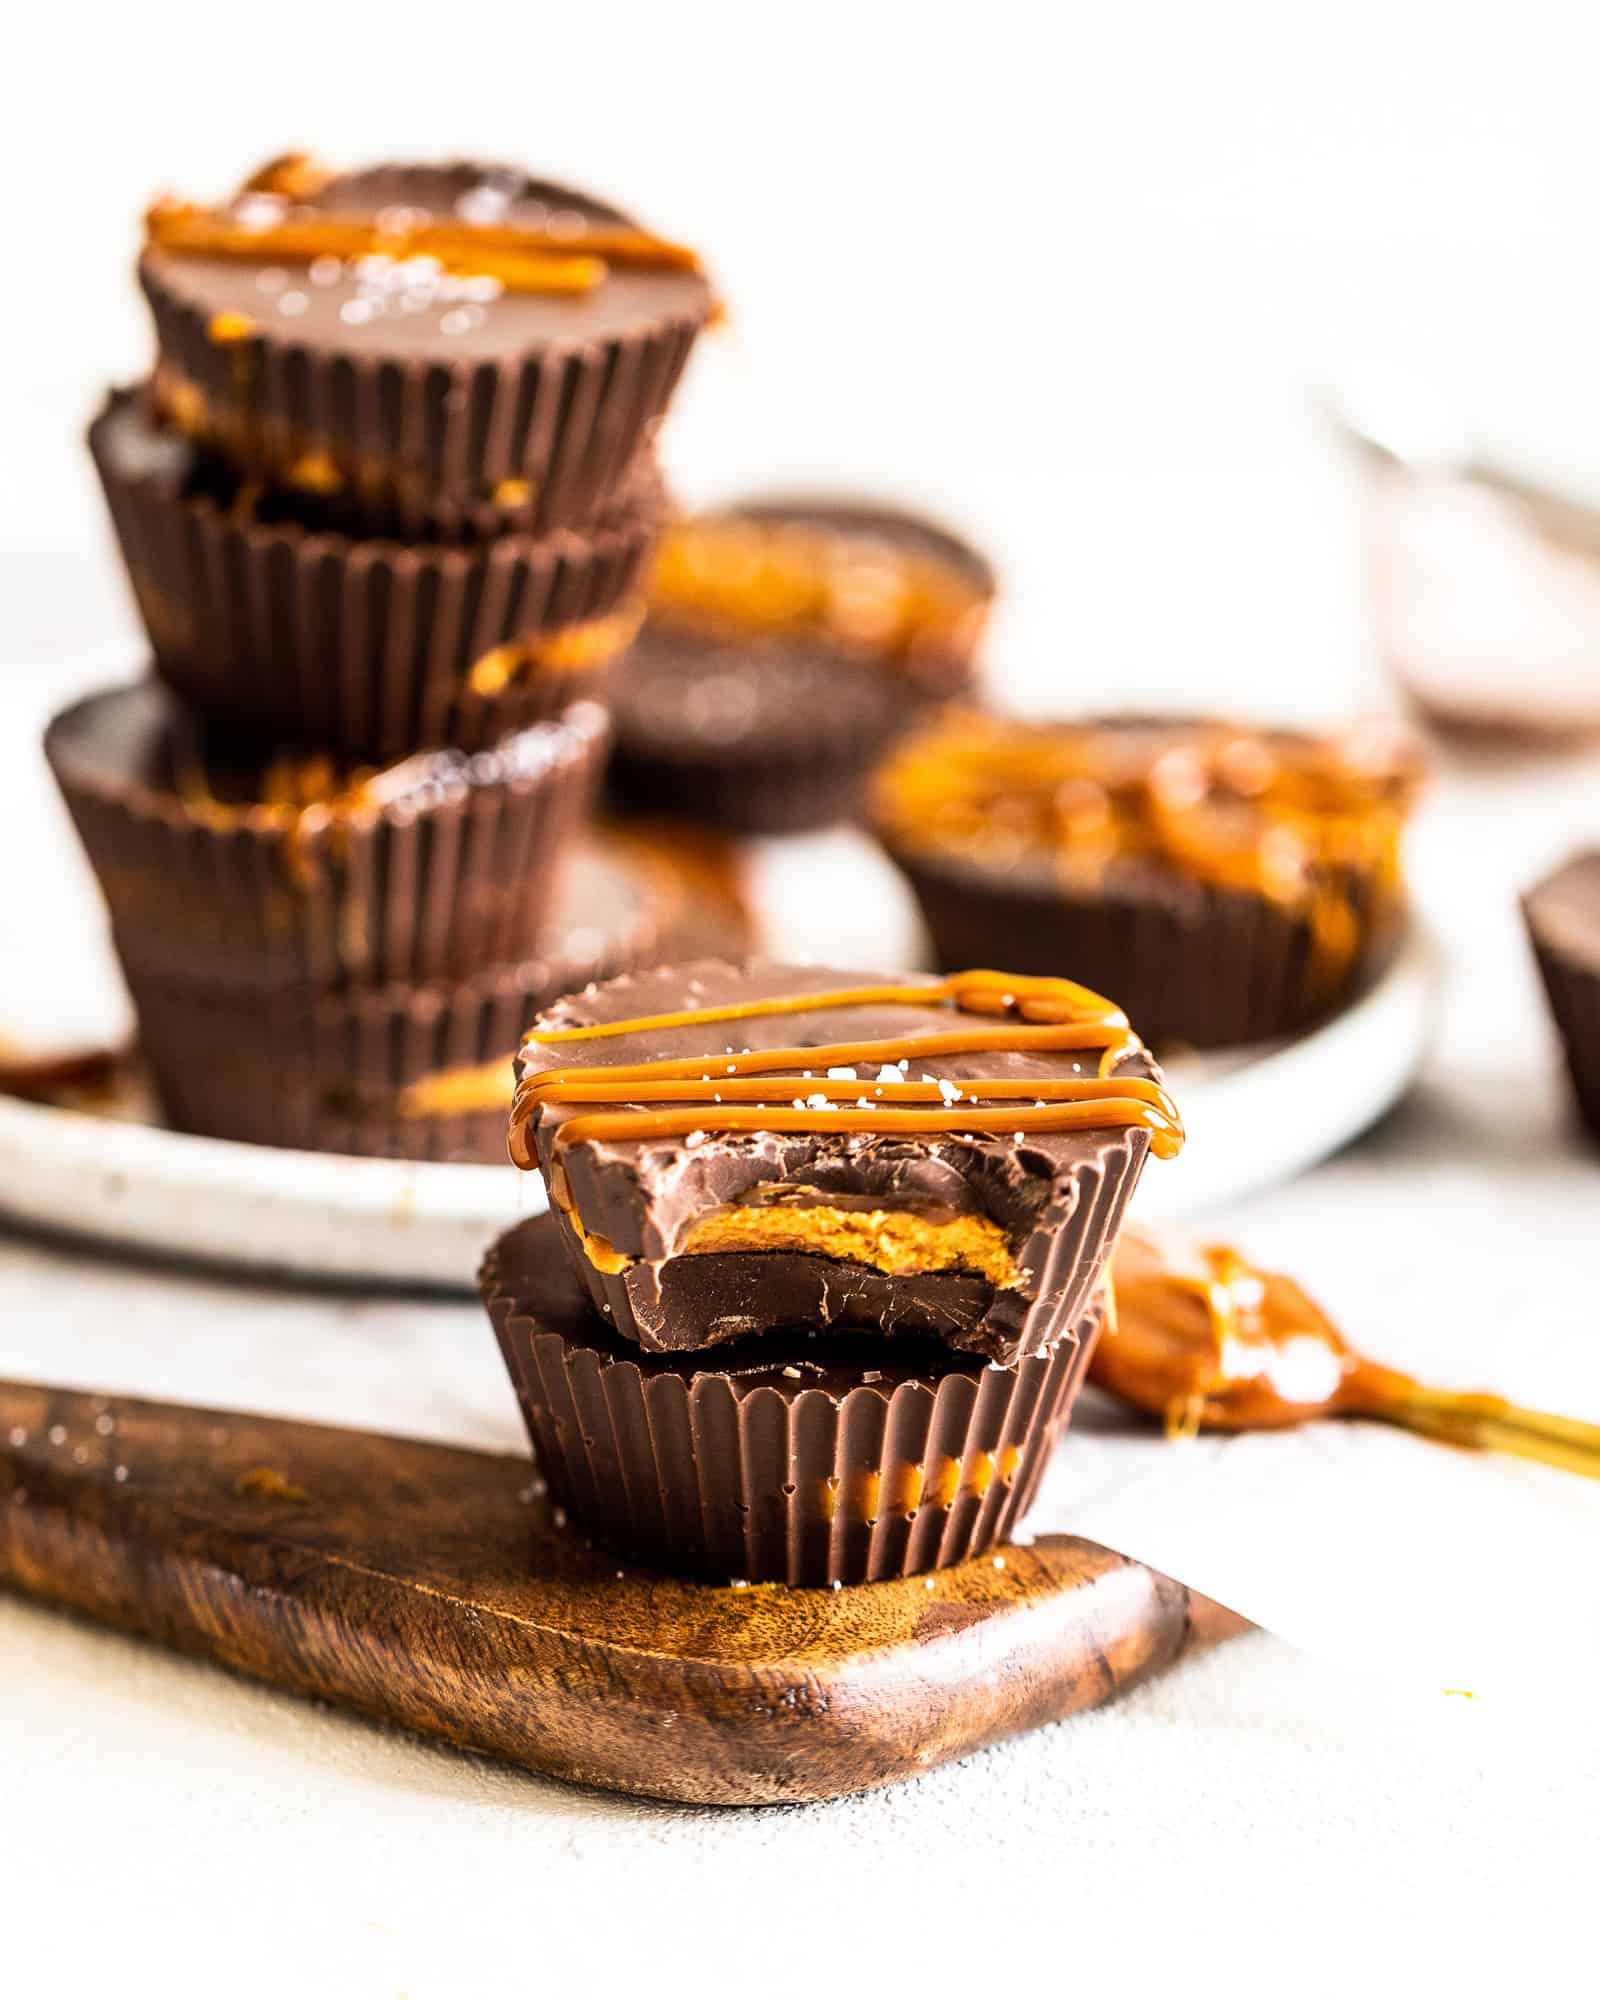 salted caramel peanut butter cups stacked up on top of each other with more peanut butter cups in the background